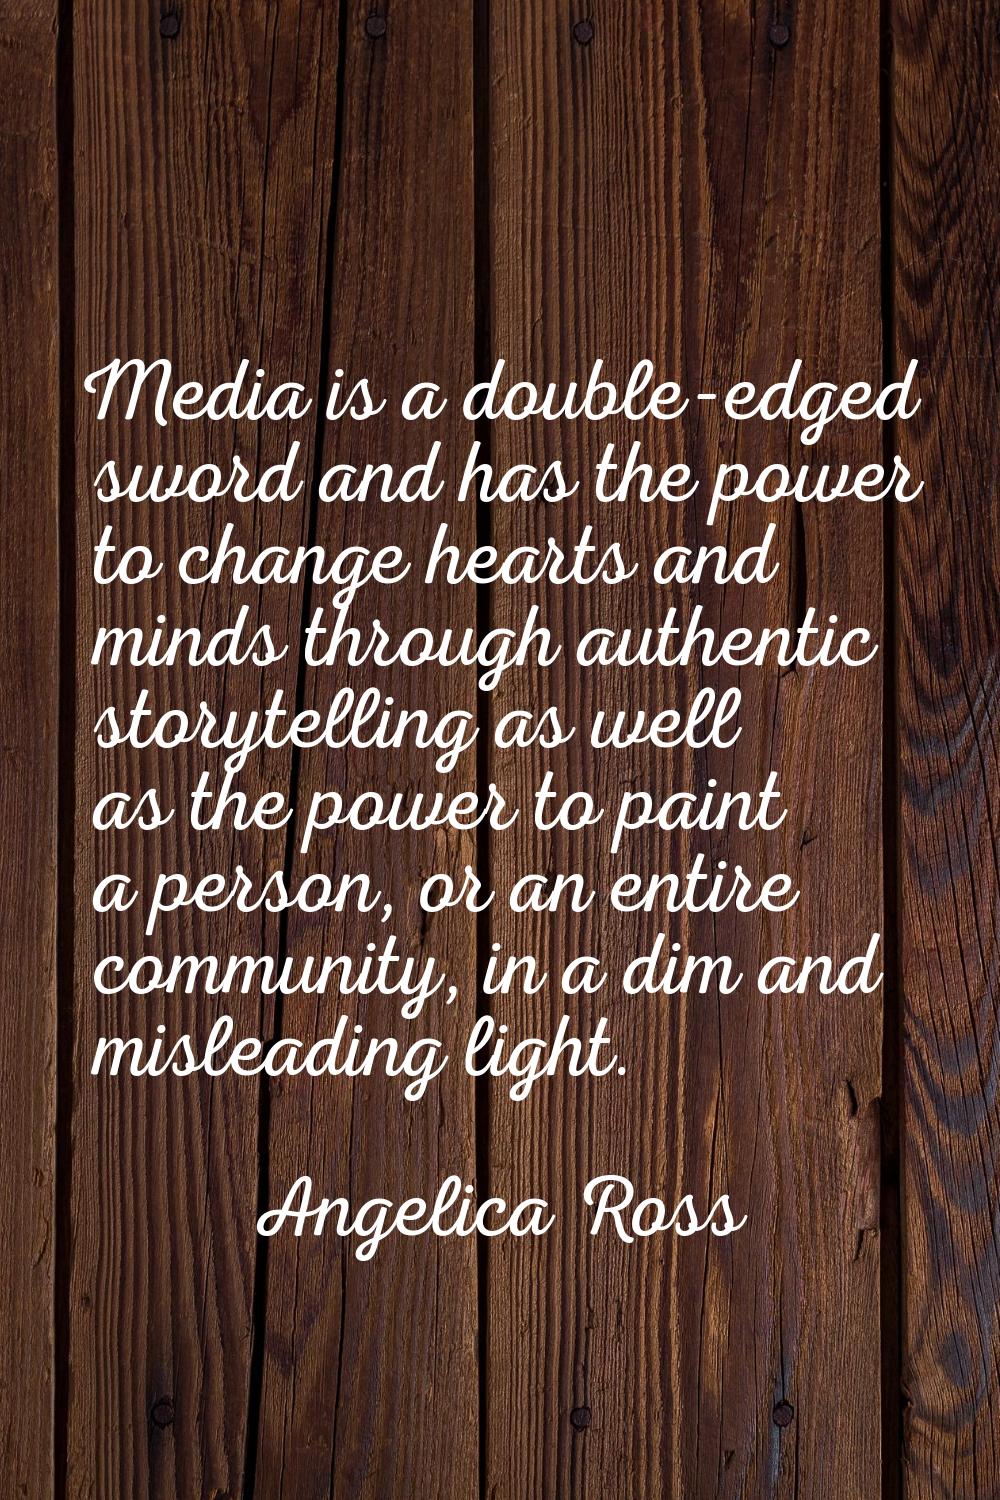 Media is a double-edged sword and has the power to change hearts and minds through authentic storyt